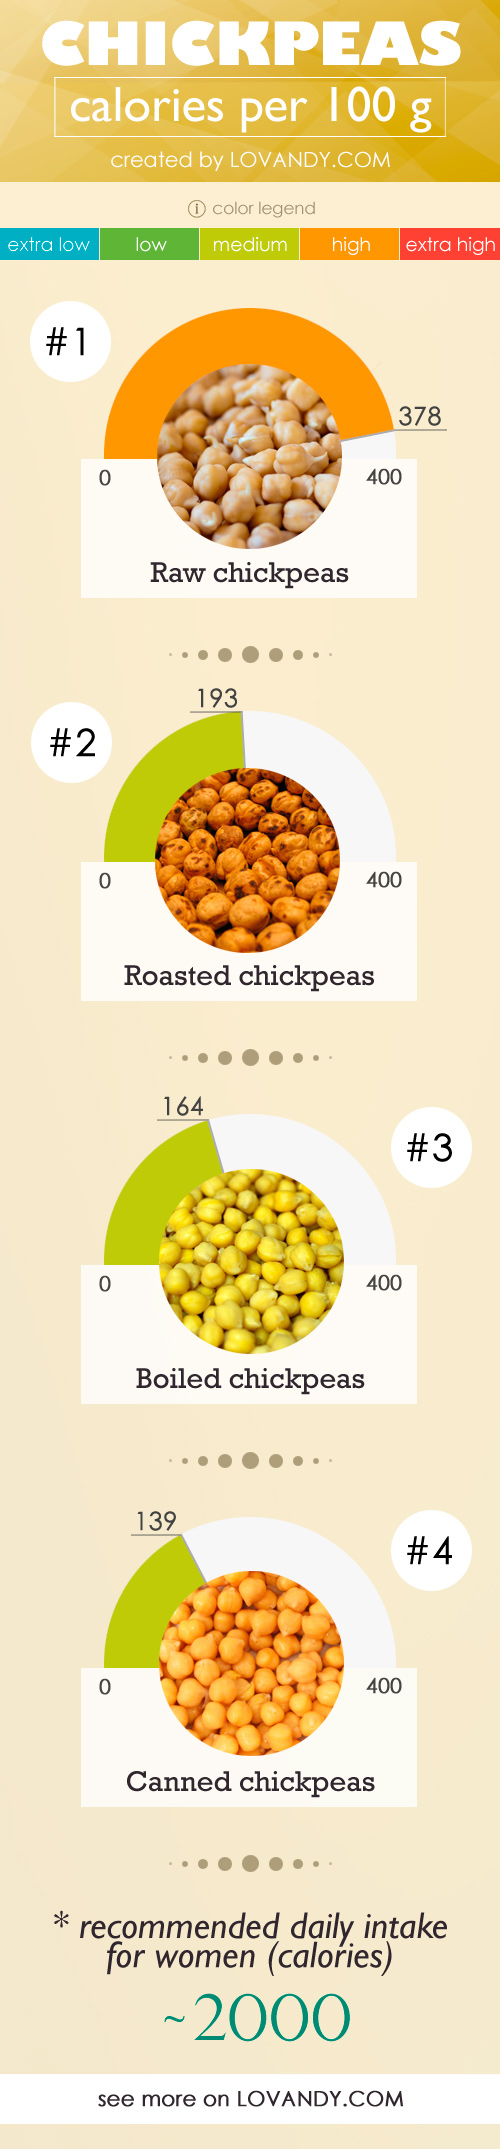 Baked Chickpeas Calories